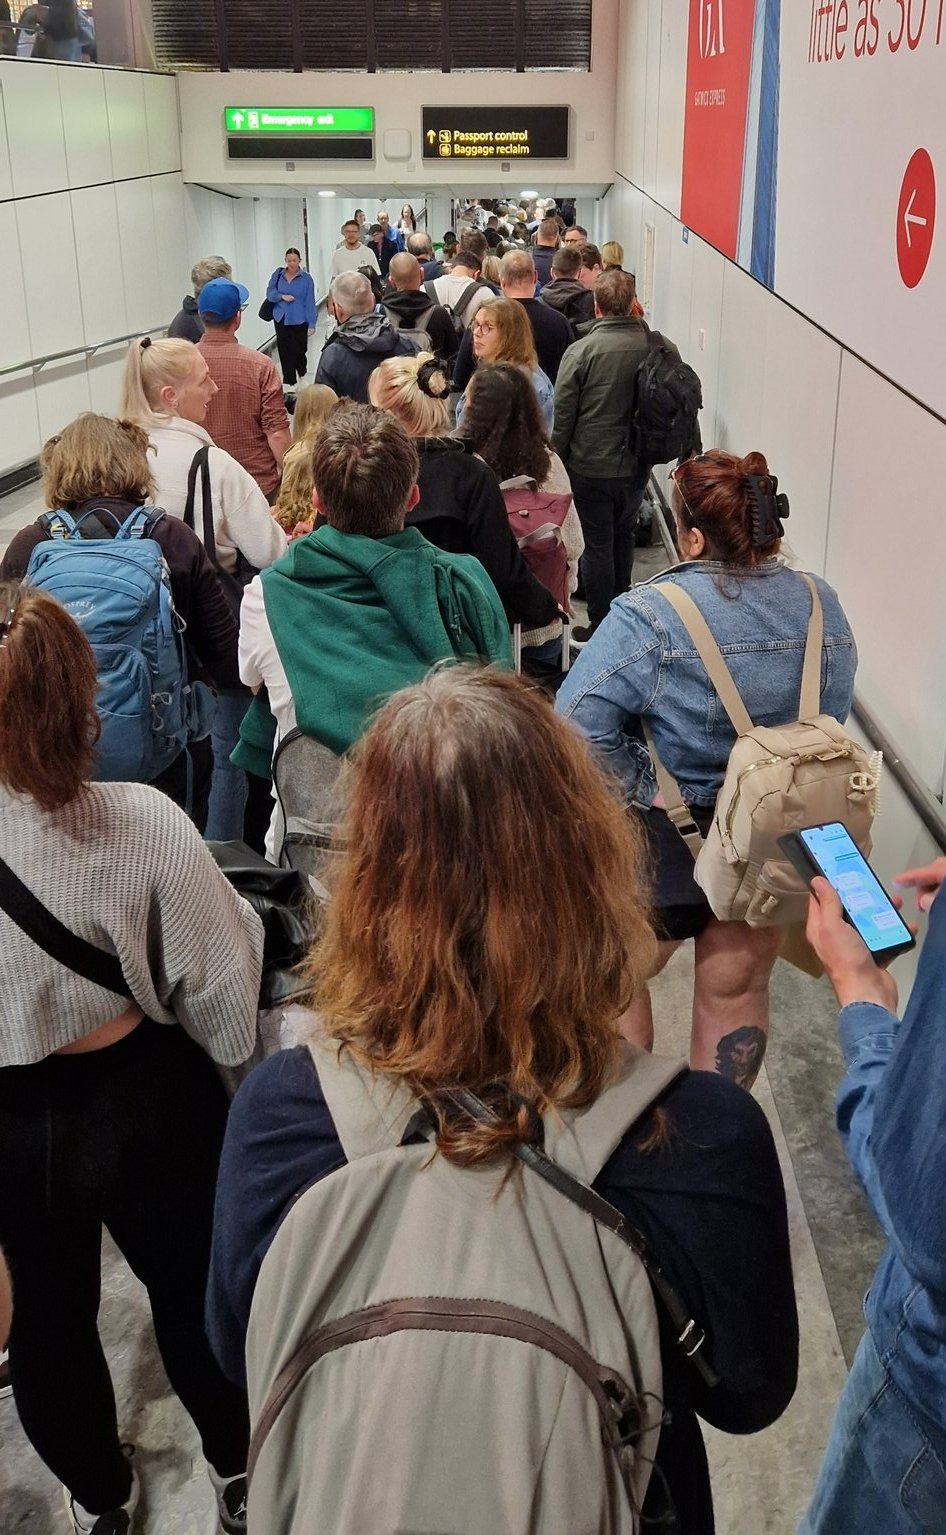 Long queues have been reported at gatwick Airport